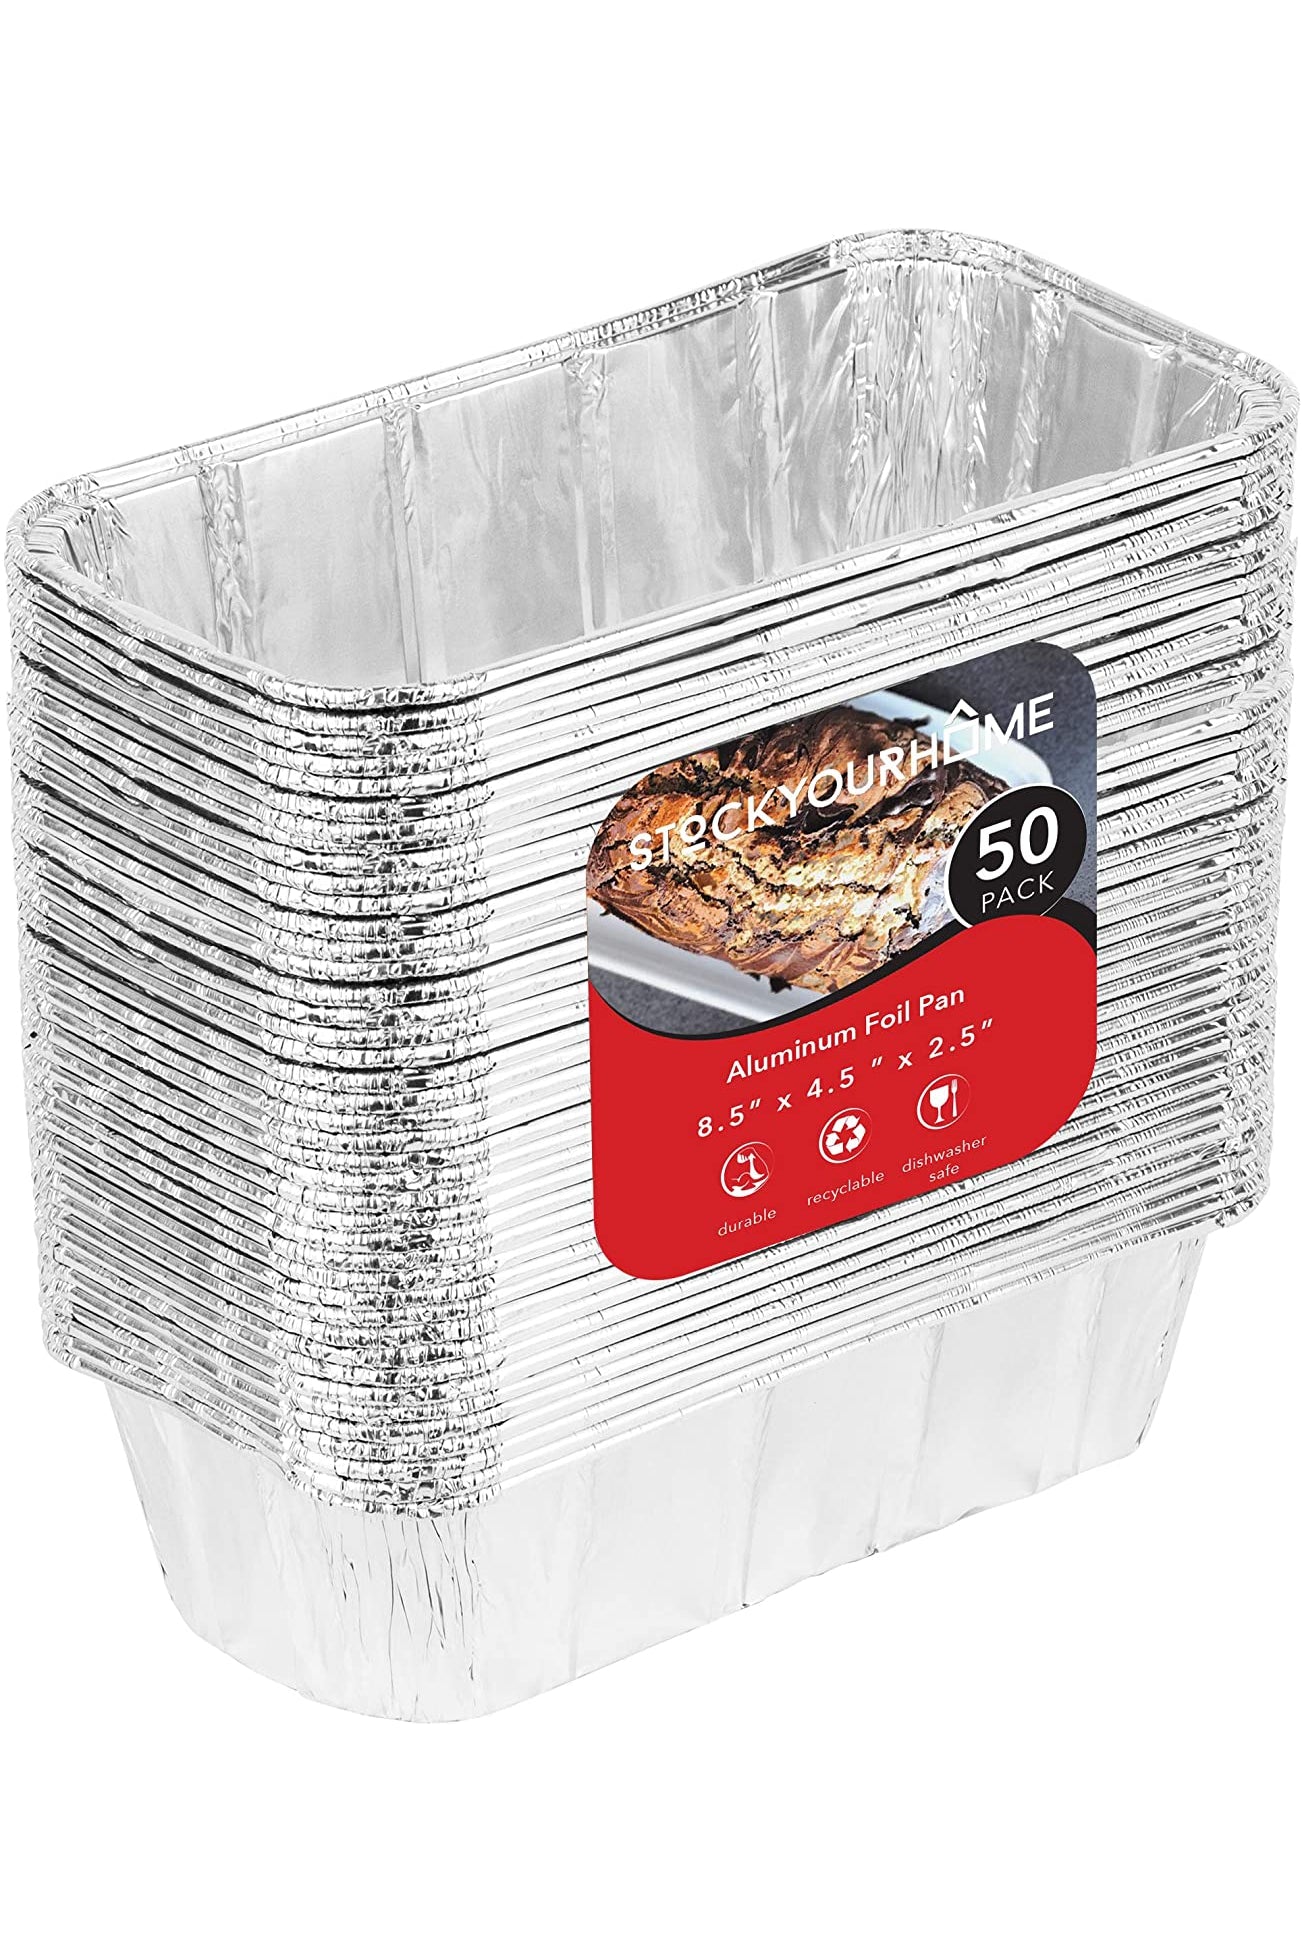 Stock Your Home 8x8 Foil Pans with Lids (20 Count) 8 inch Square Aluminum Pans with Covers - Foil Pans and Foil Lids - Disposable Food Contai